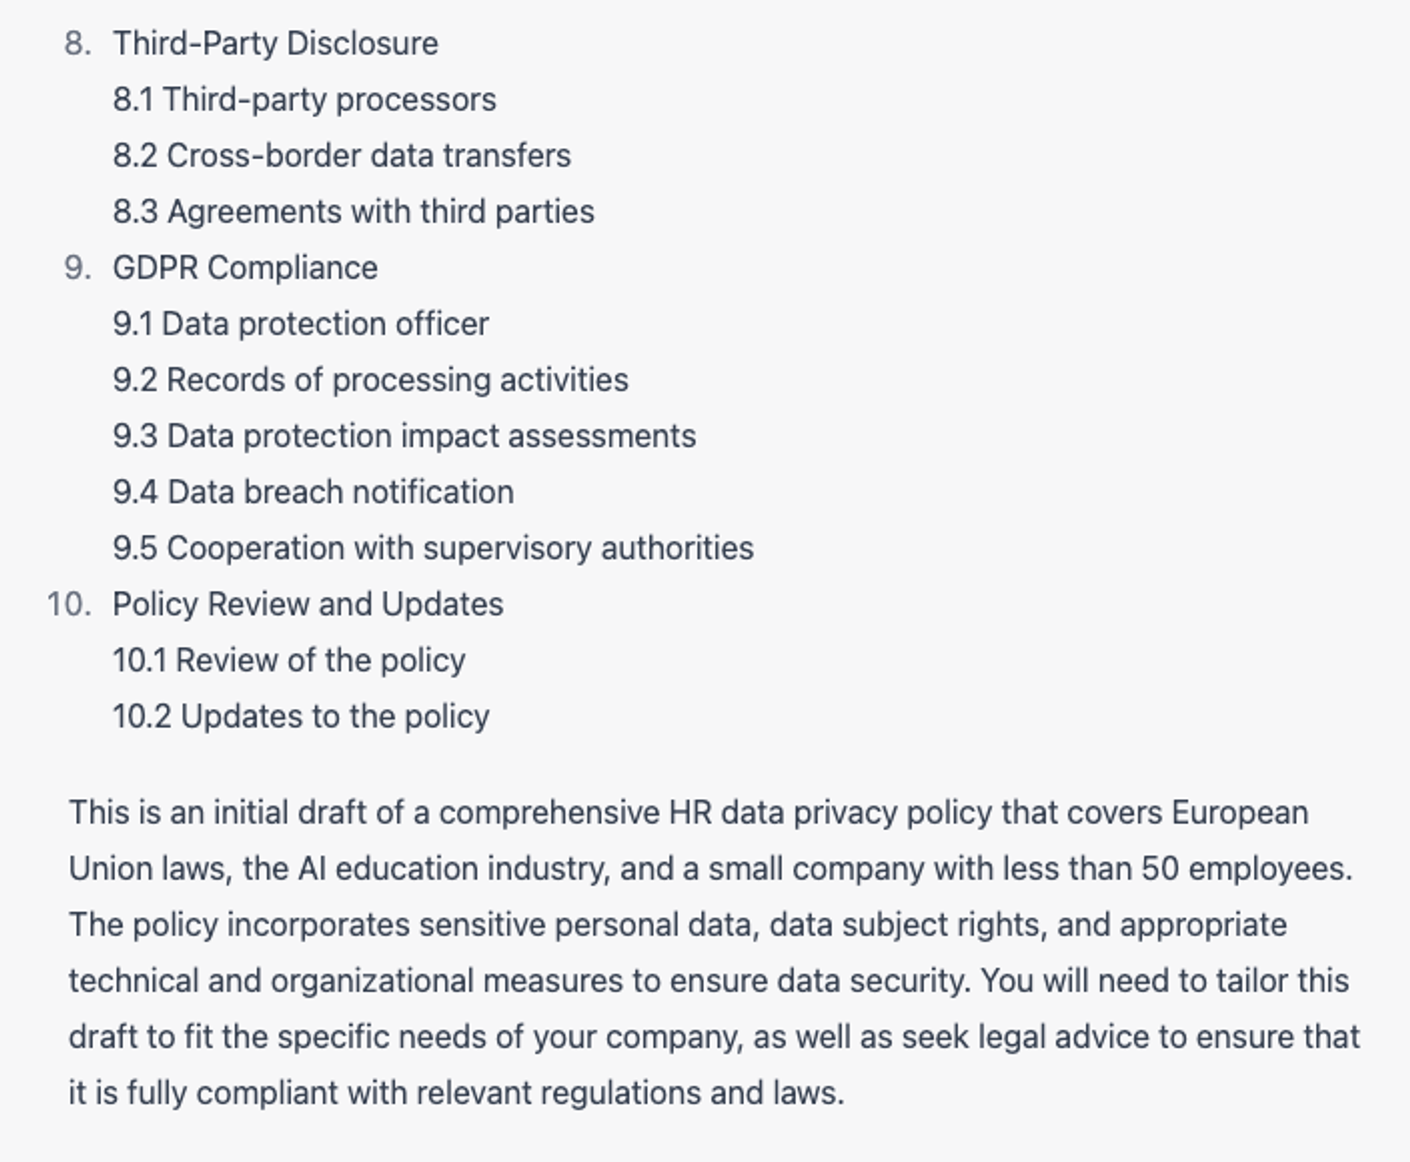  7 Proven ChatGPT Prompts: Writing HR data privacy policies